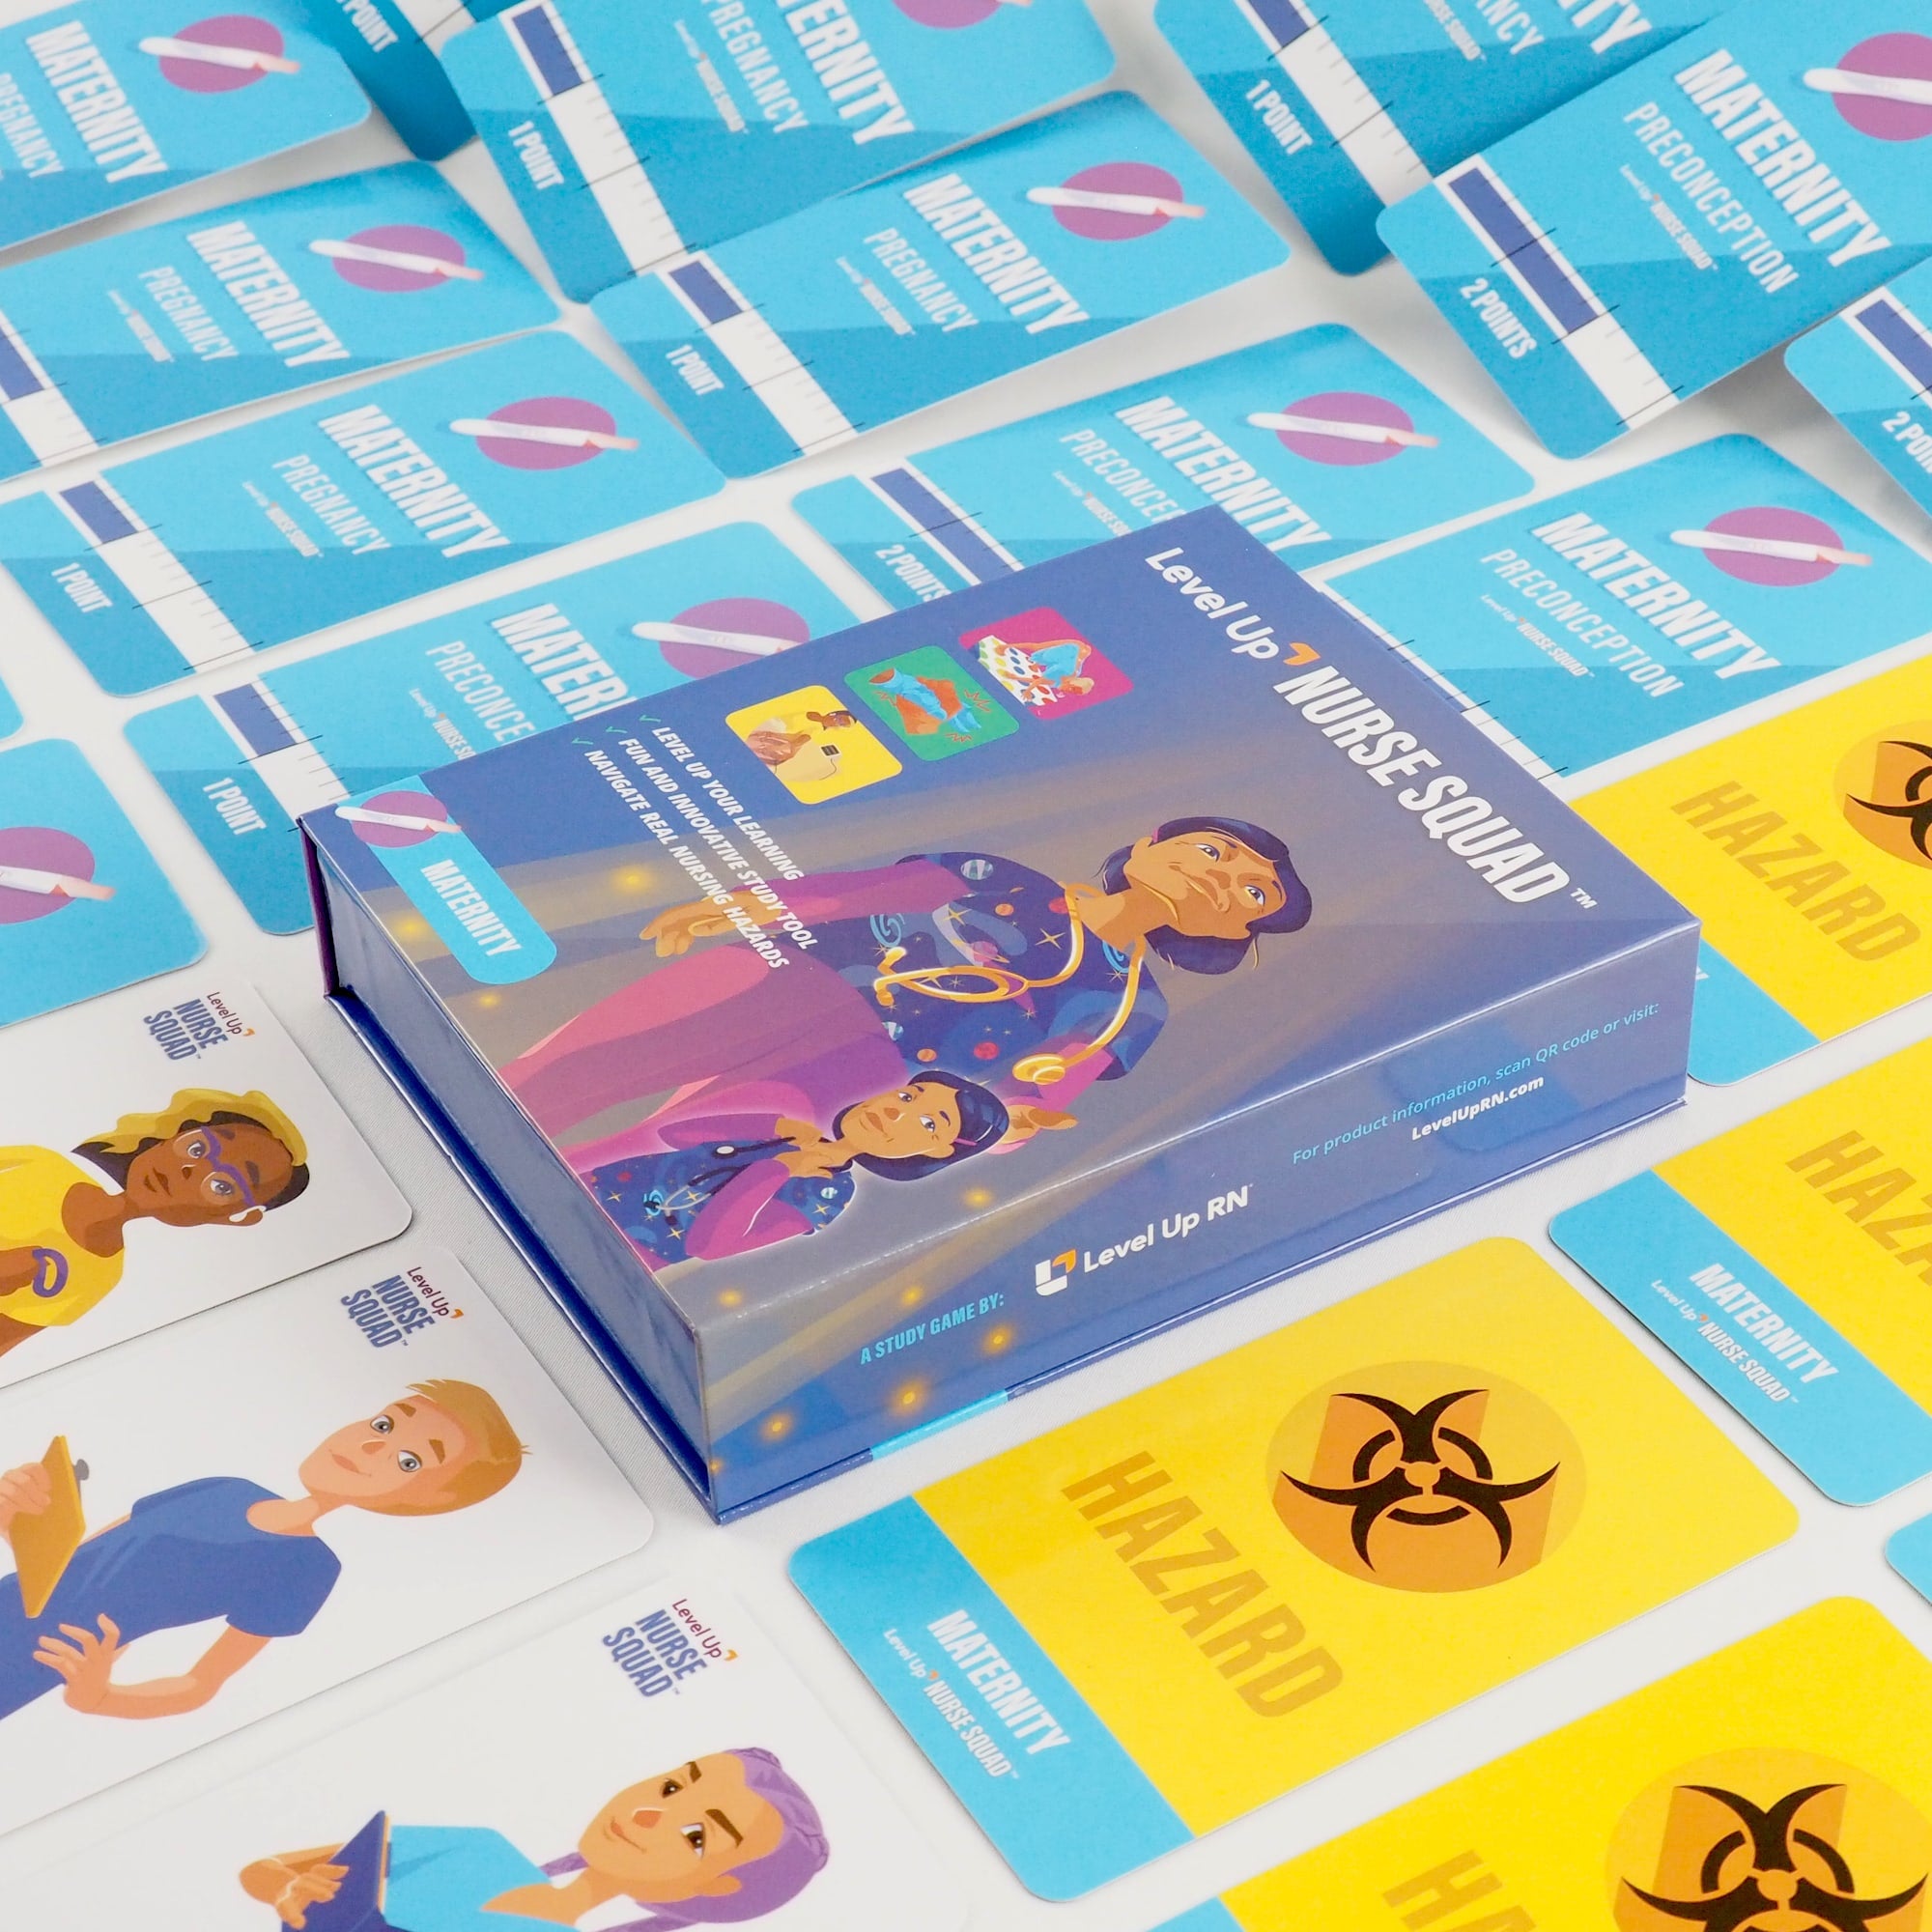 Level Up Nurse Squad - Maternity - Card Game from Level Up RN: Maternity-FlatLay